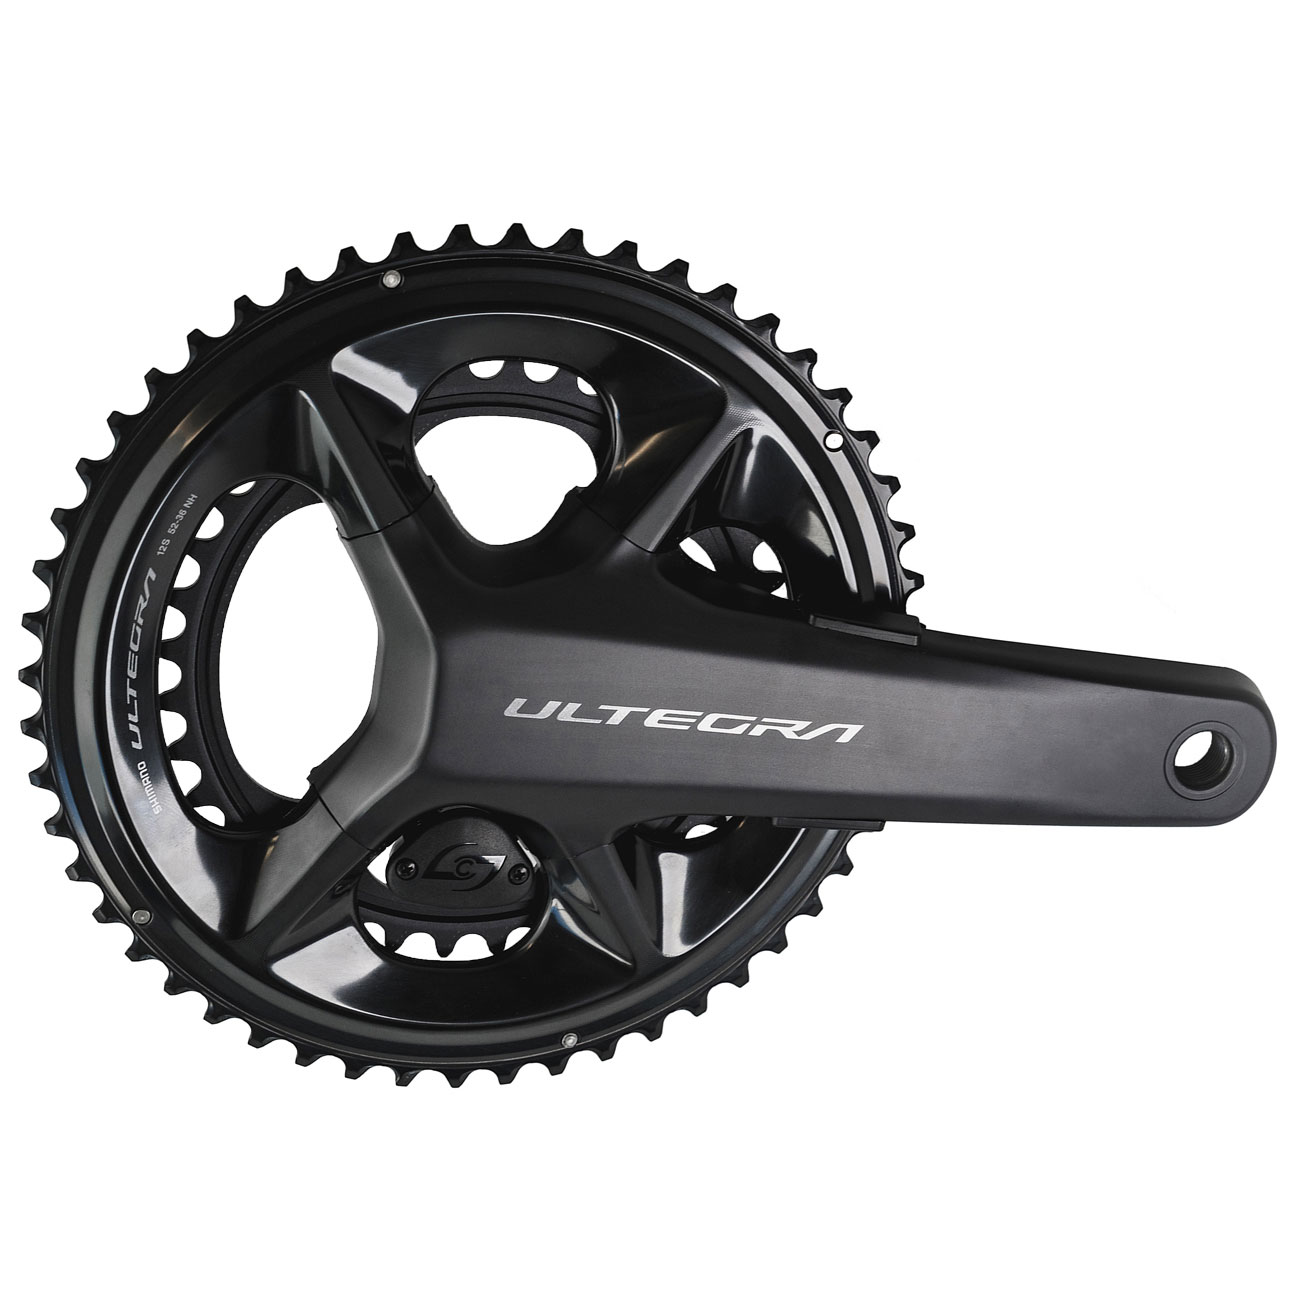 Productfoto van Stages Cycling Power R Powermeter | Crank by Shimano - Ultegra R8100 | 2x12-speed